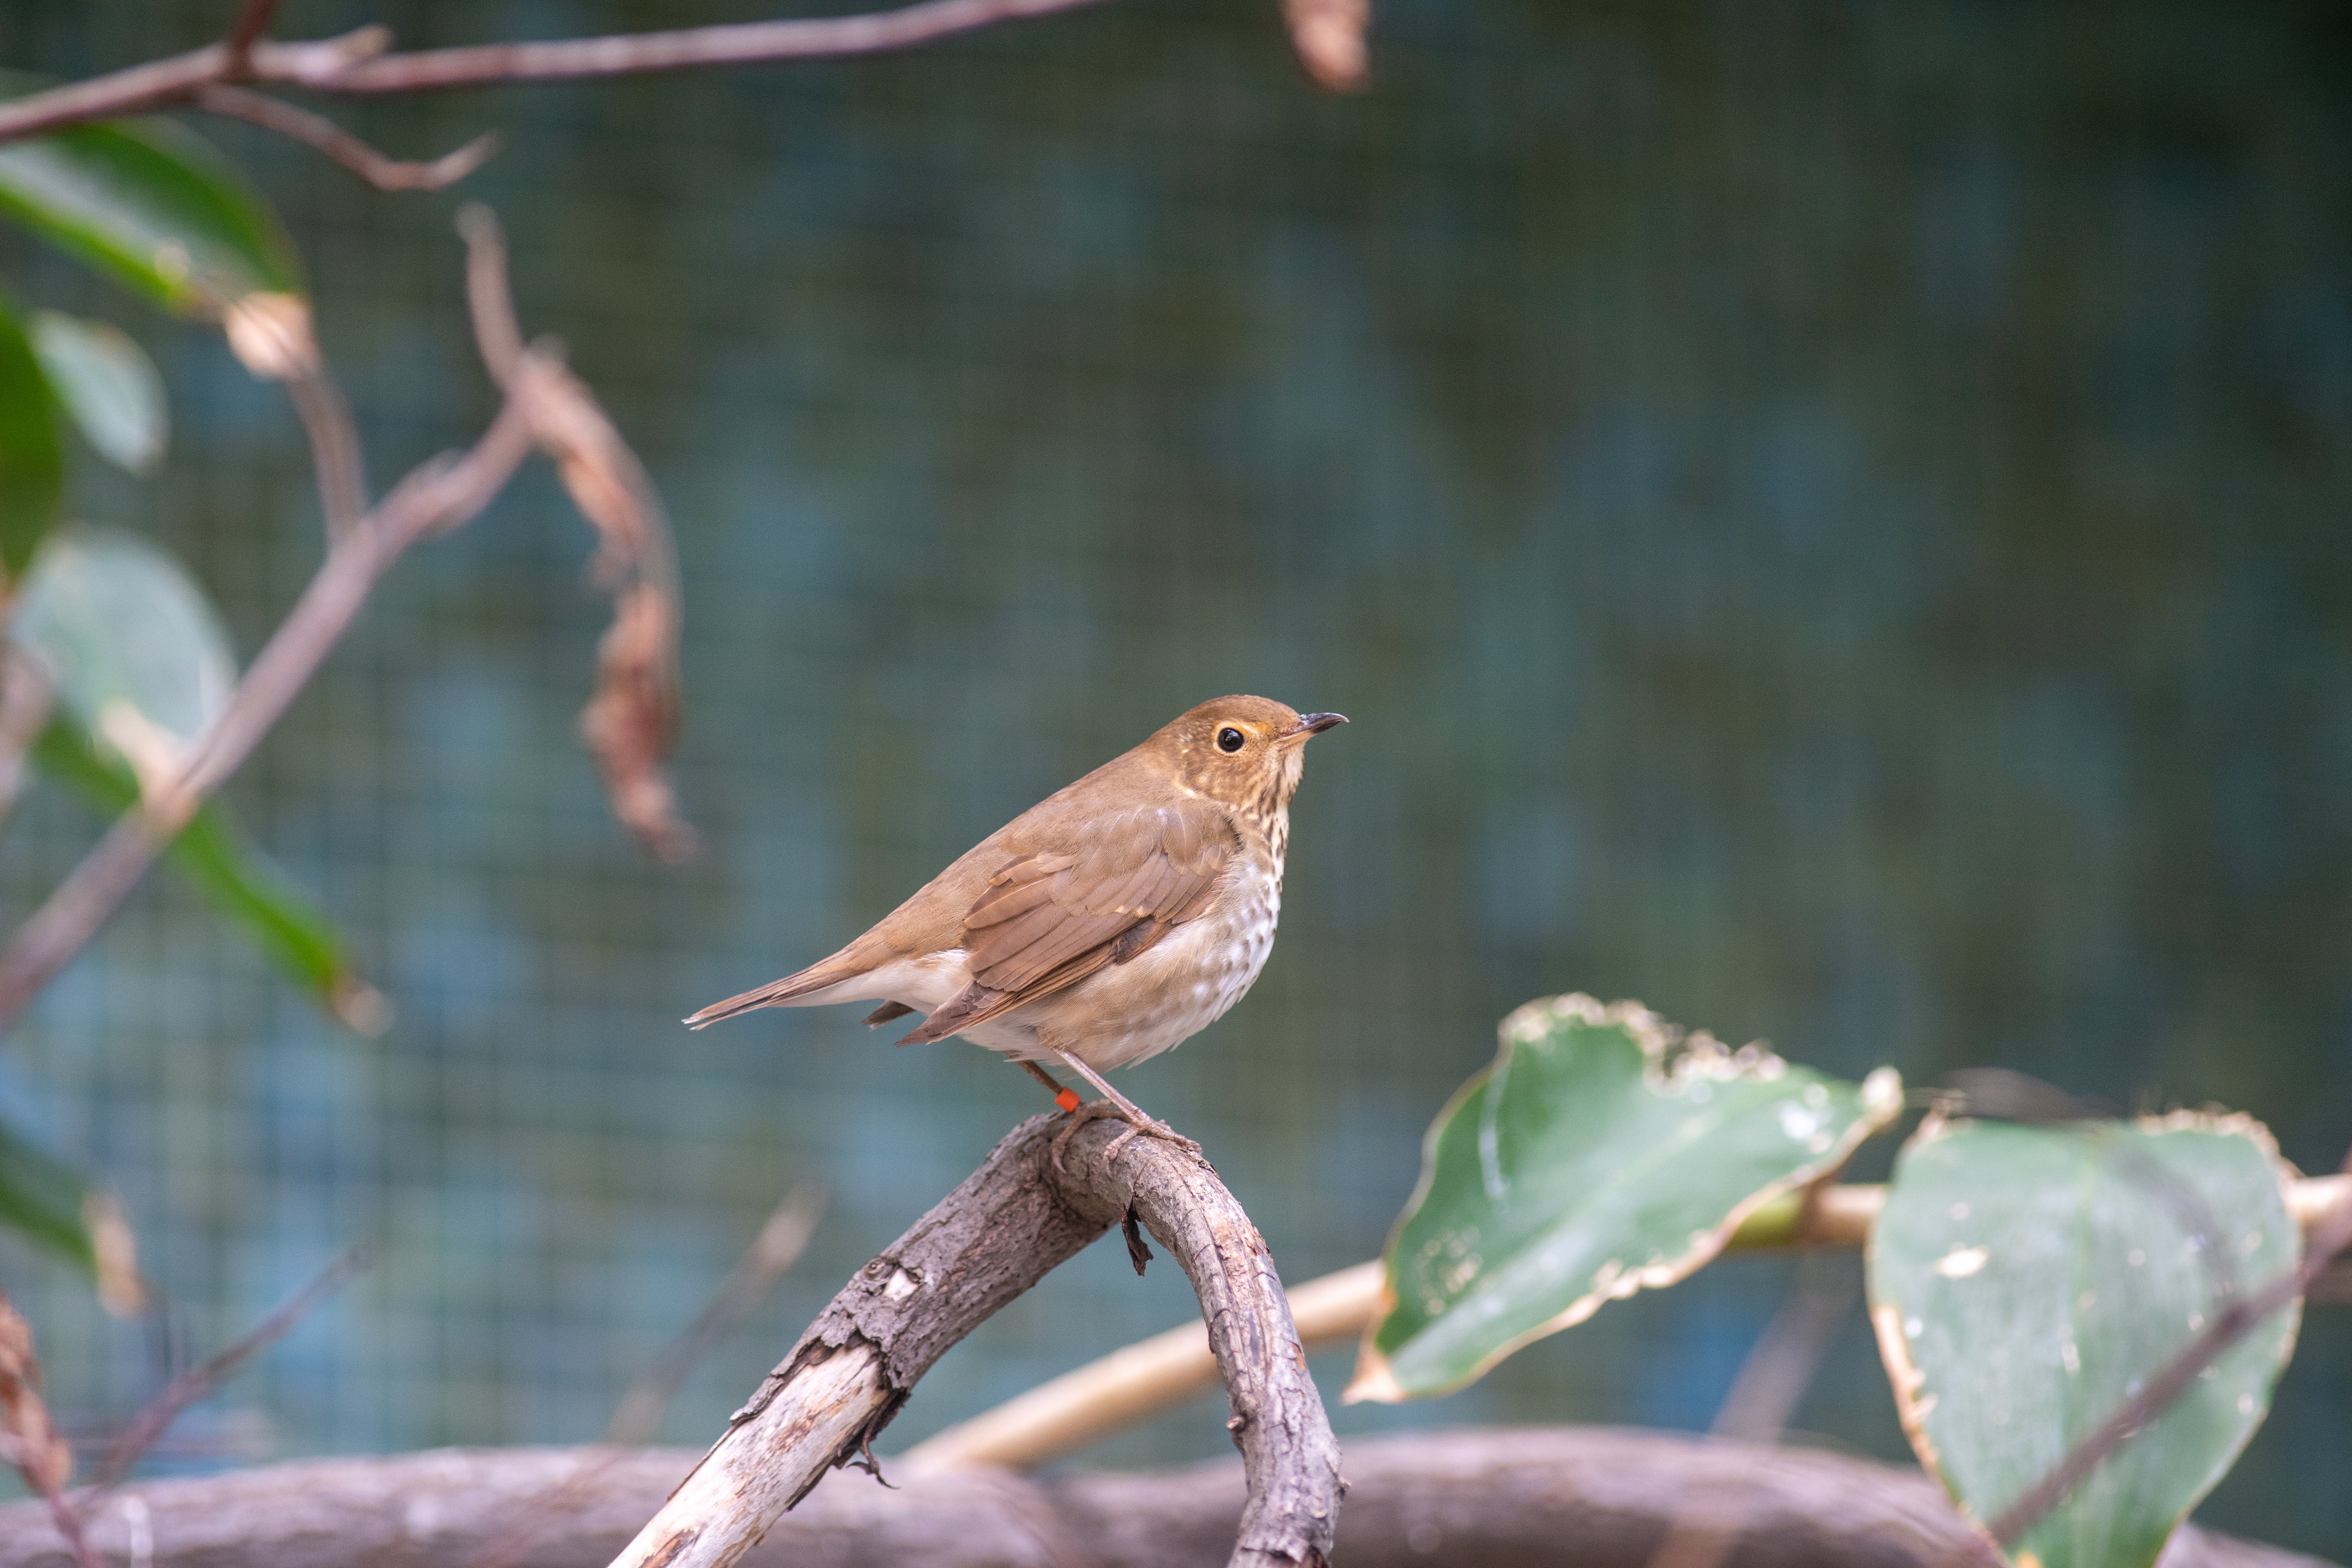 A Swainson's thrush rests on a branch in the Bird Friendly Coffee Farm aviary.